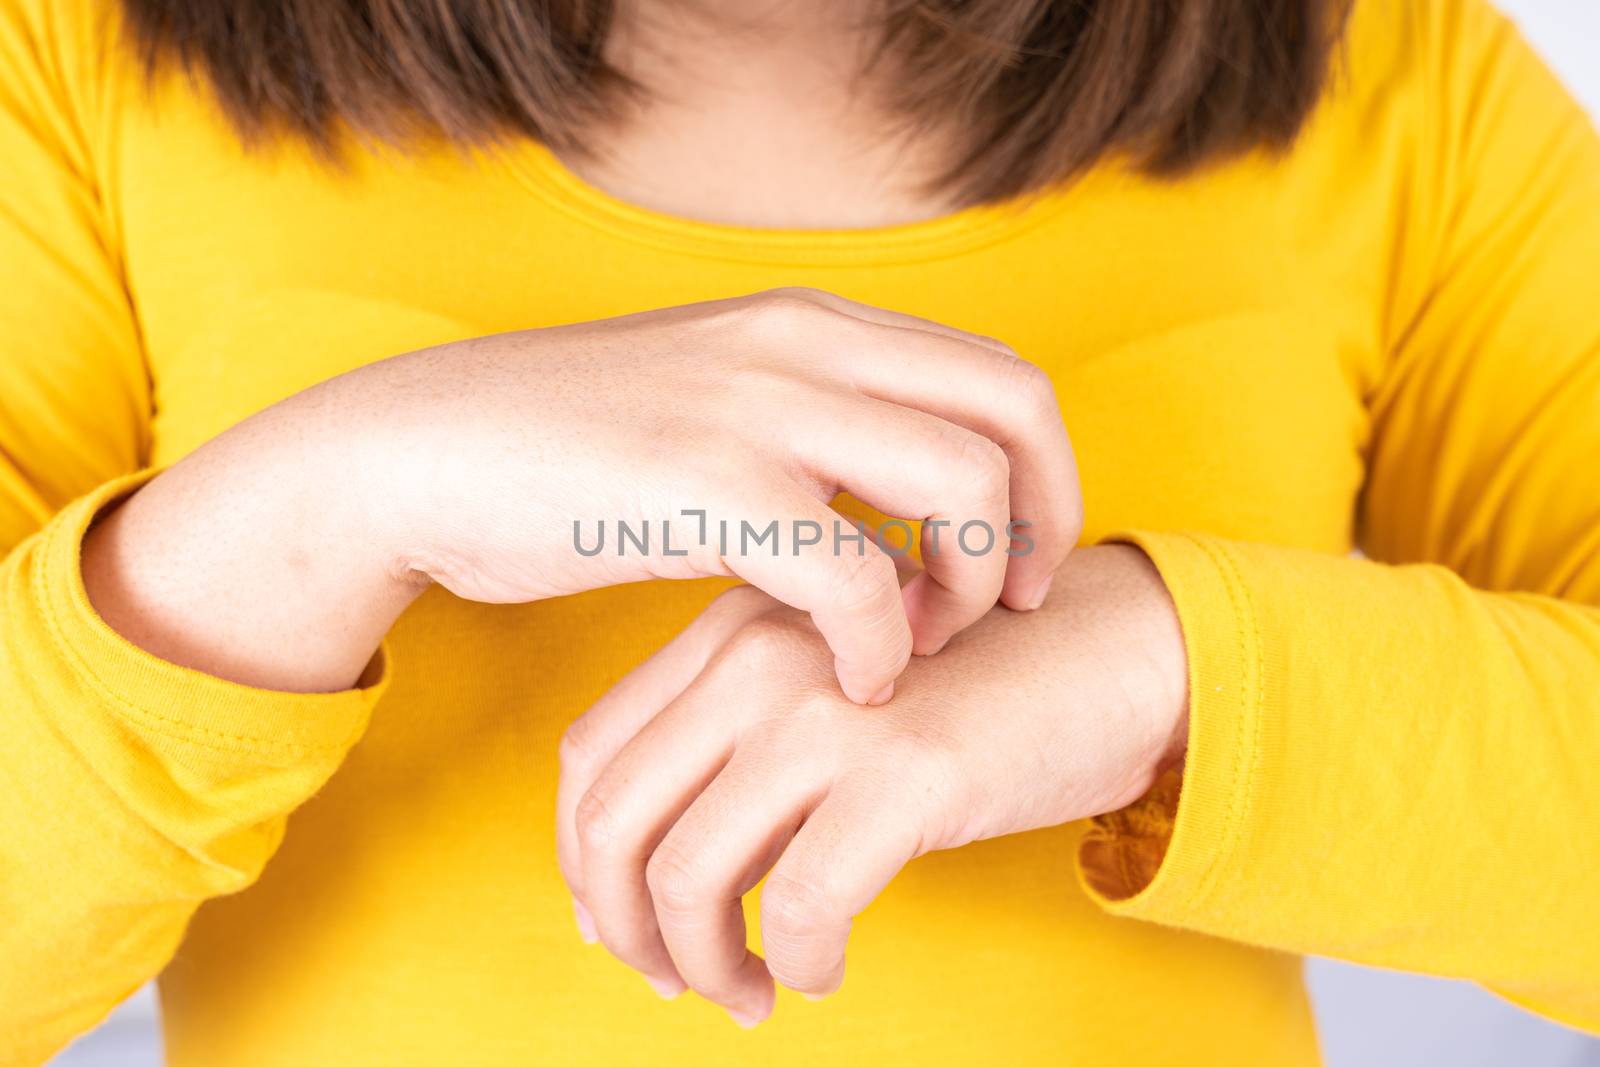 Female scratching her hand on white background with copy space. Medical, healthcare for advertising concept.